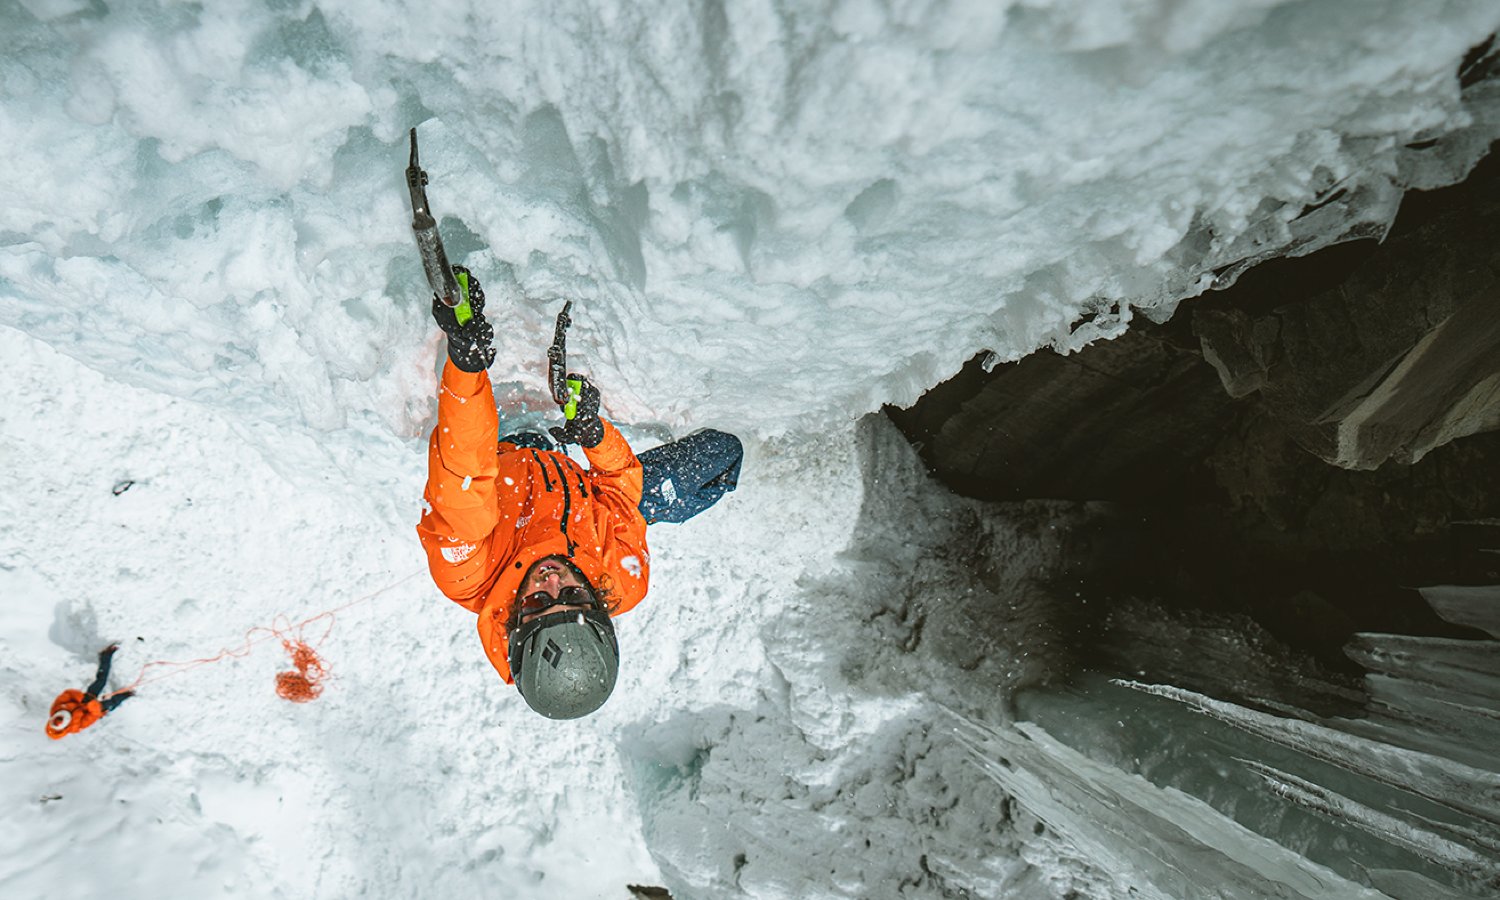 The North Face team athlete Jackson Marvell ascends an icy climb in bright orange Summit Series gear.